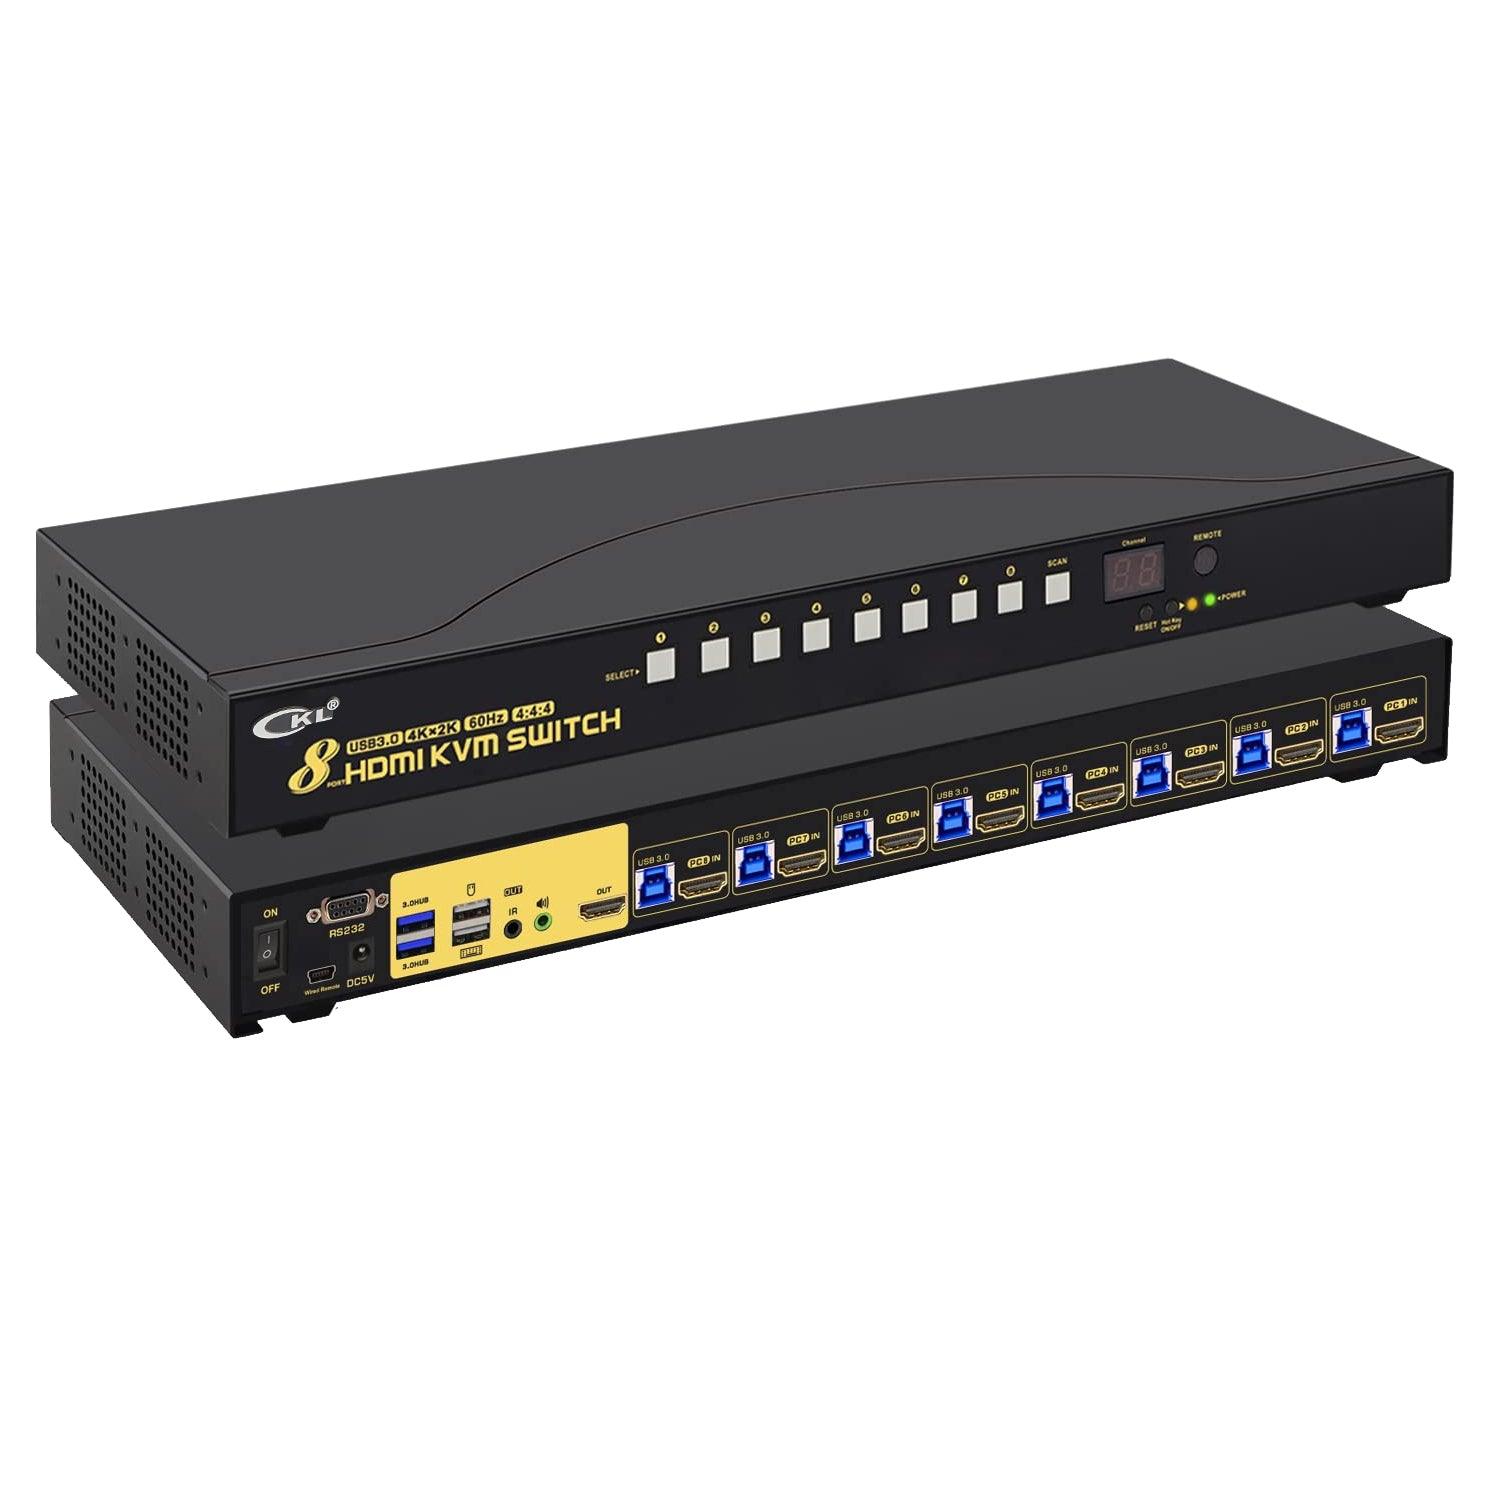 CKL 8 Port Rack Mount USB 3.0 KVM Switch HDMI 4K@60Hz with Audio, Cables and 2 Extra USB 3.0 Hub for 16 Computers Sharing Single Monitor (CKL-9138H-3) - CKL KVM Switches